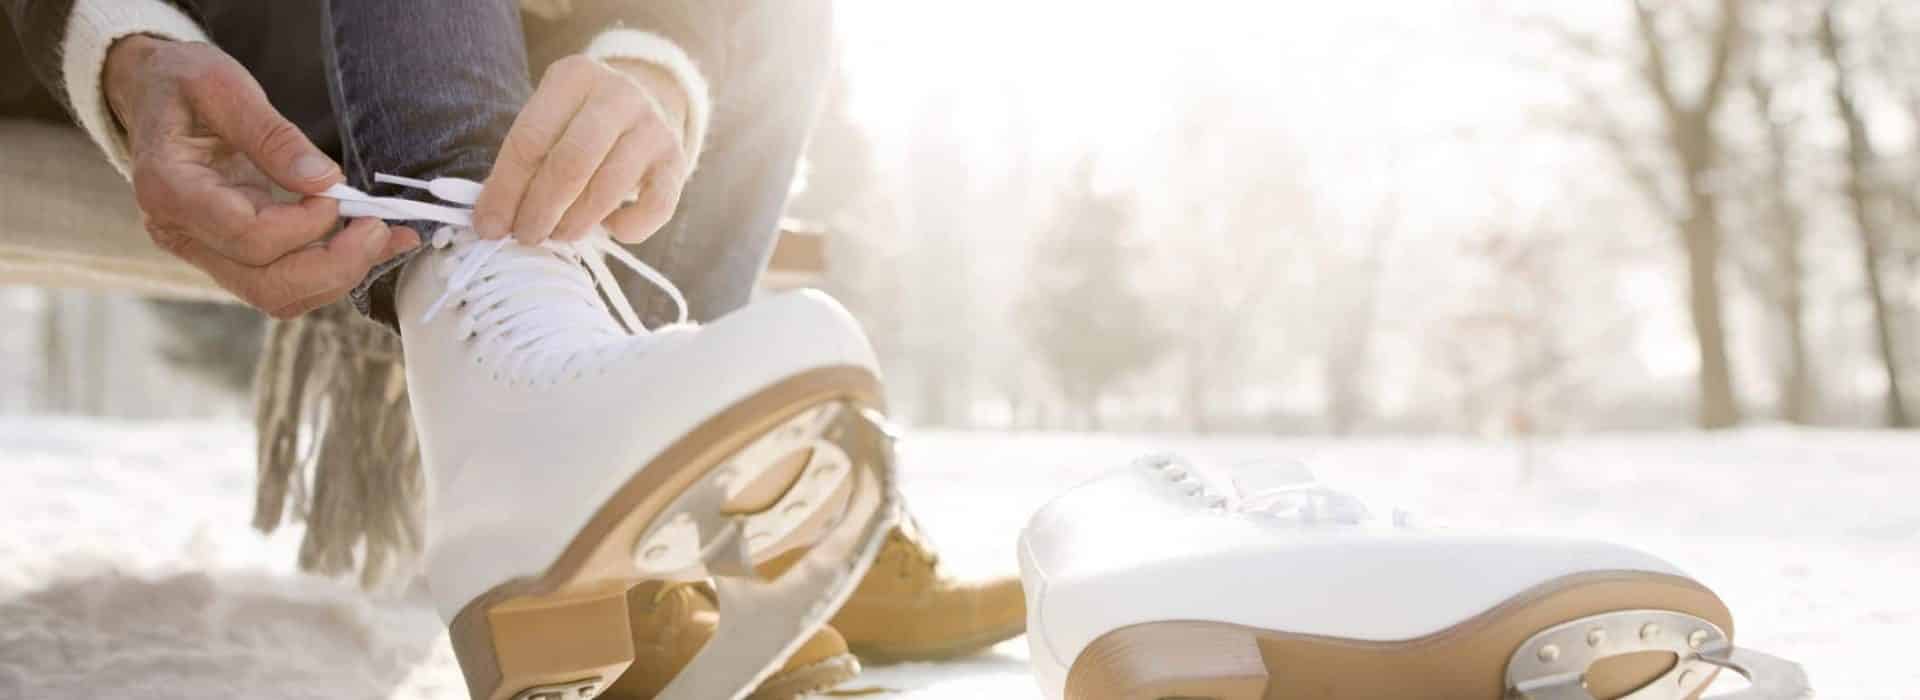 woman tying her white ice skates|young woman helping boyfriend get up after falling while ice skating